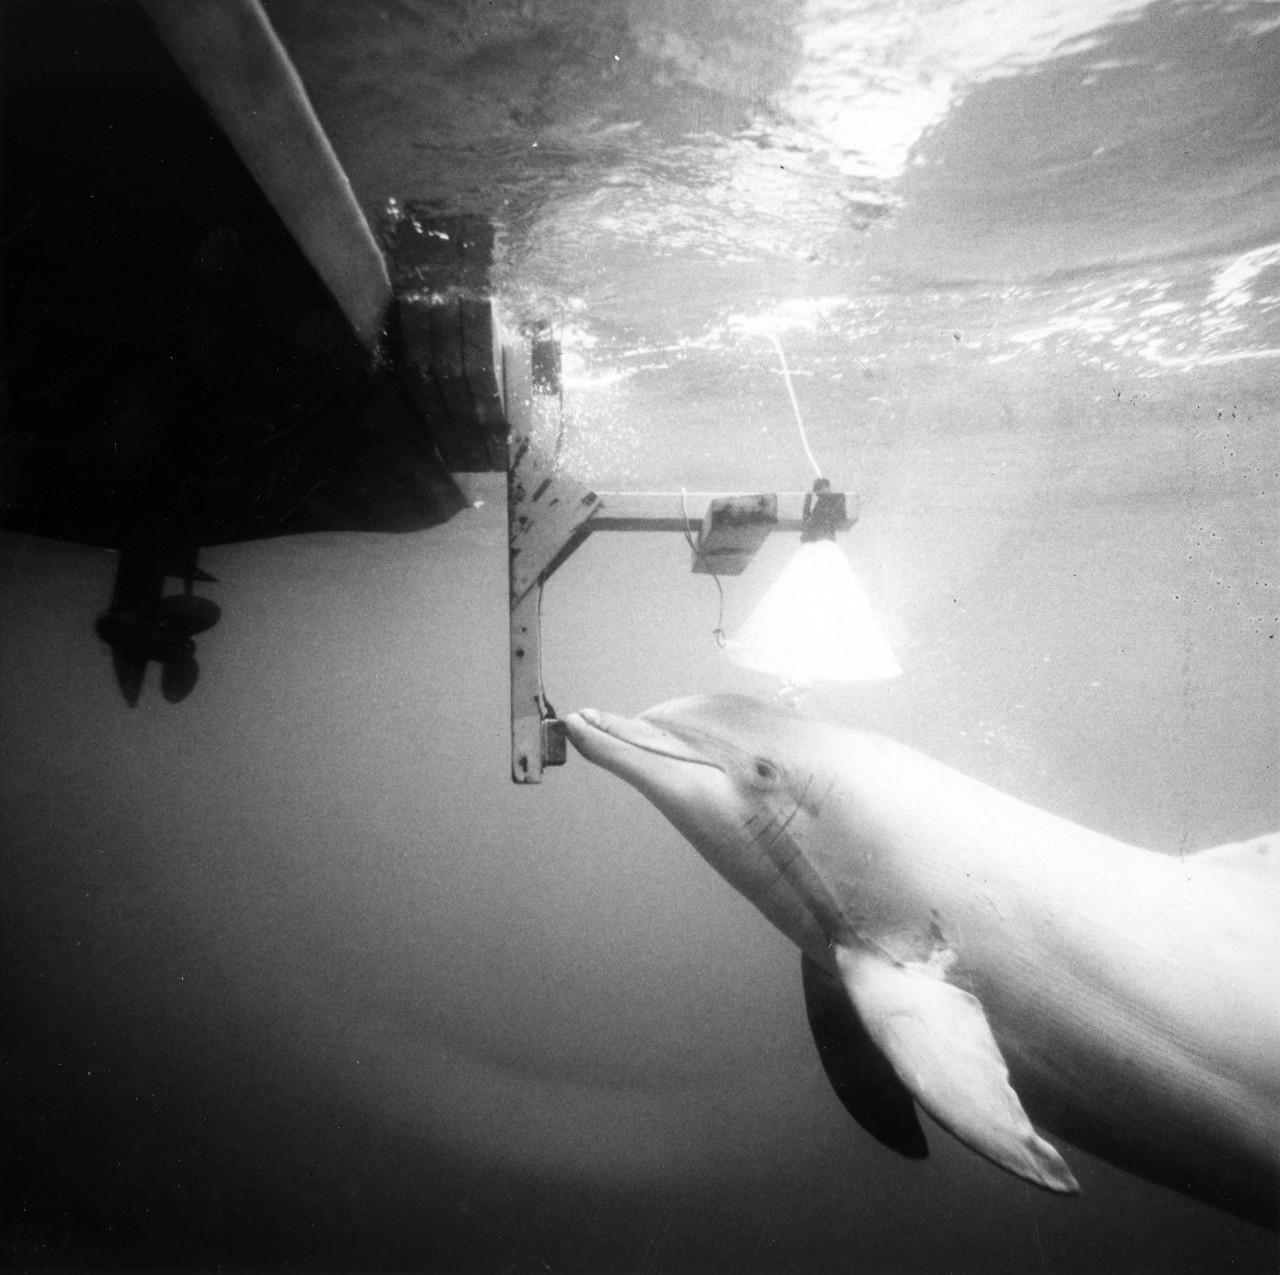 Point Mugu, CA - Tuffy the porpoise performs a task by pushing a buzzer on the side of a boat. Tuffy is the Naval Missile Center's well-known trained porpoise. June 11, 1969. 